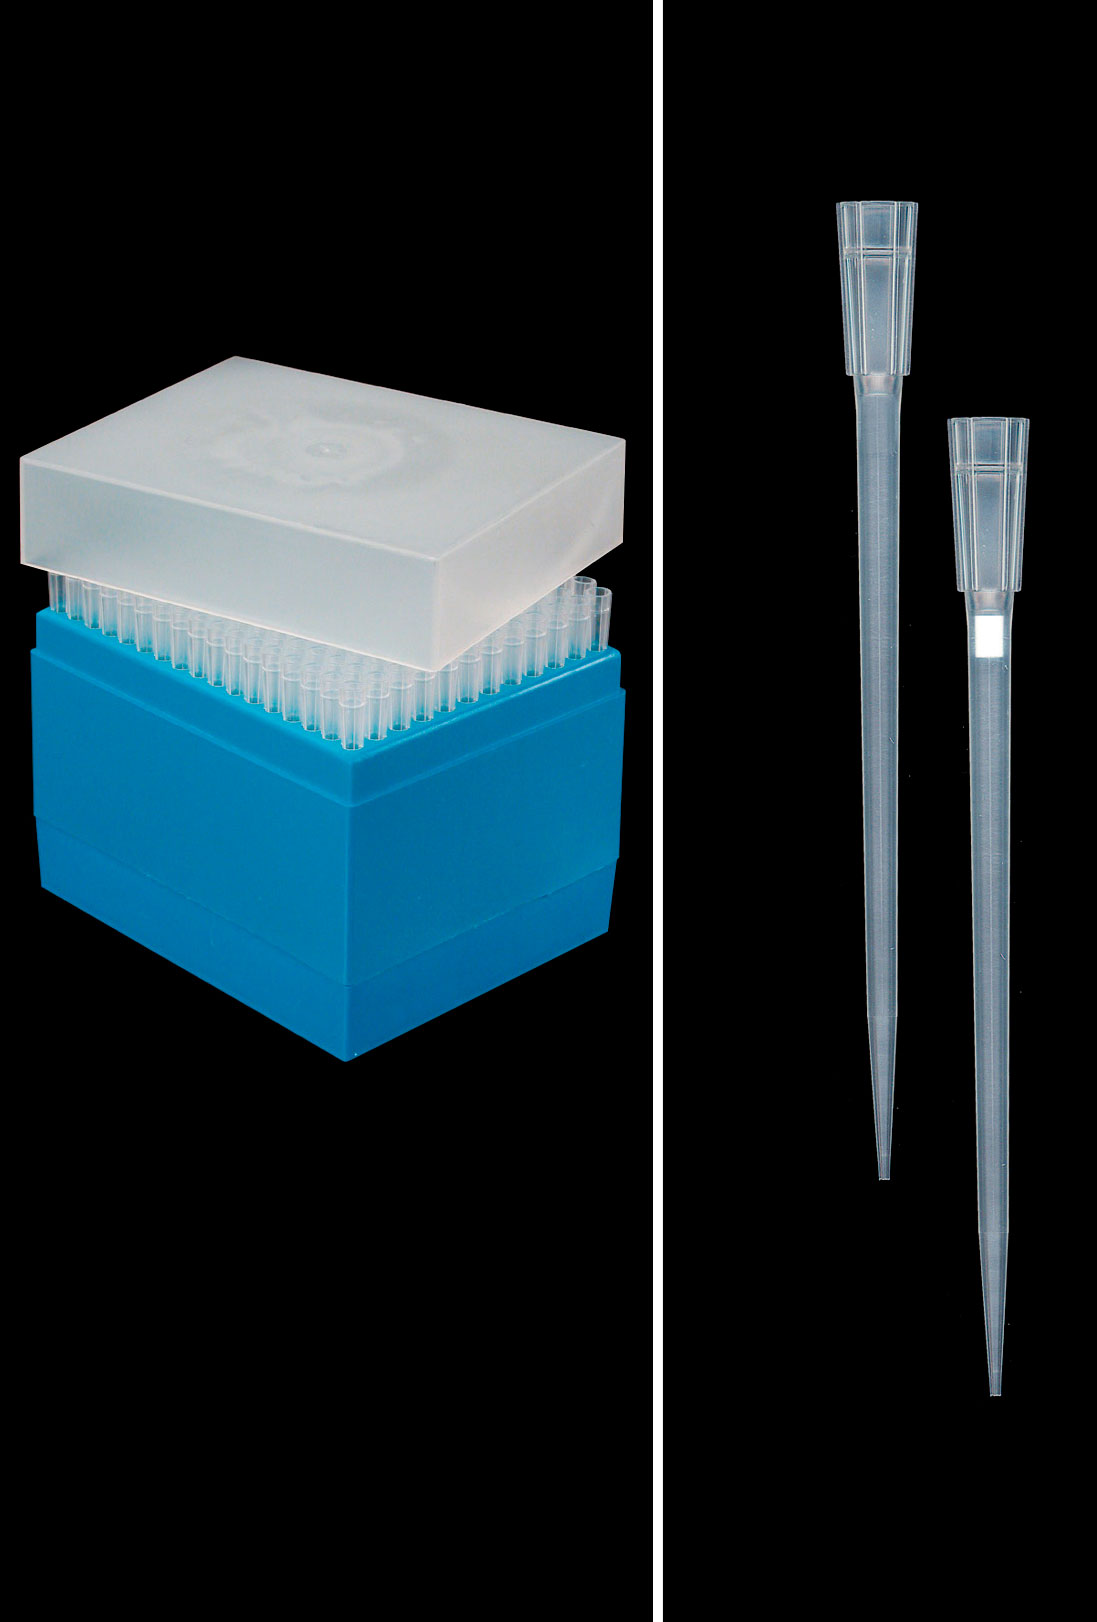 Tip with filter for automatic pipettes. 1-200µl. Vol. (µl): 1-200. Length (mm): 91. Colour: Natural. Type: Universal with filter. Extra long. Presentation: Sterile rack. Brand: Deltalab. Compatibility: Gilson, Eppendorf, Nichiryo, Finnpipette, Oxford and others